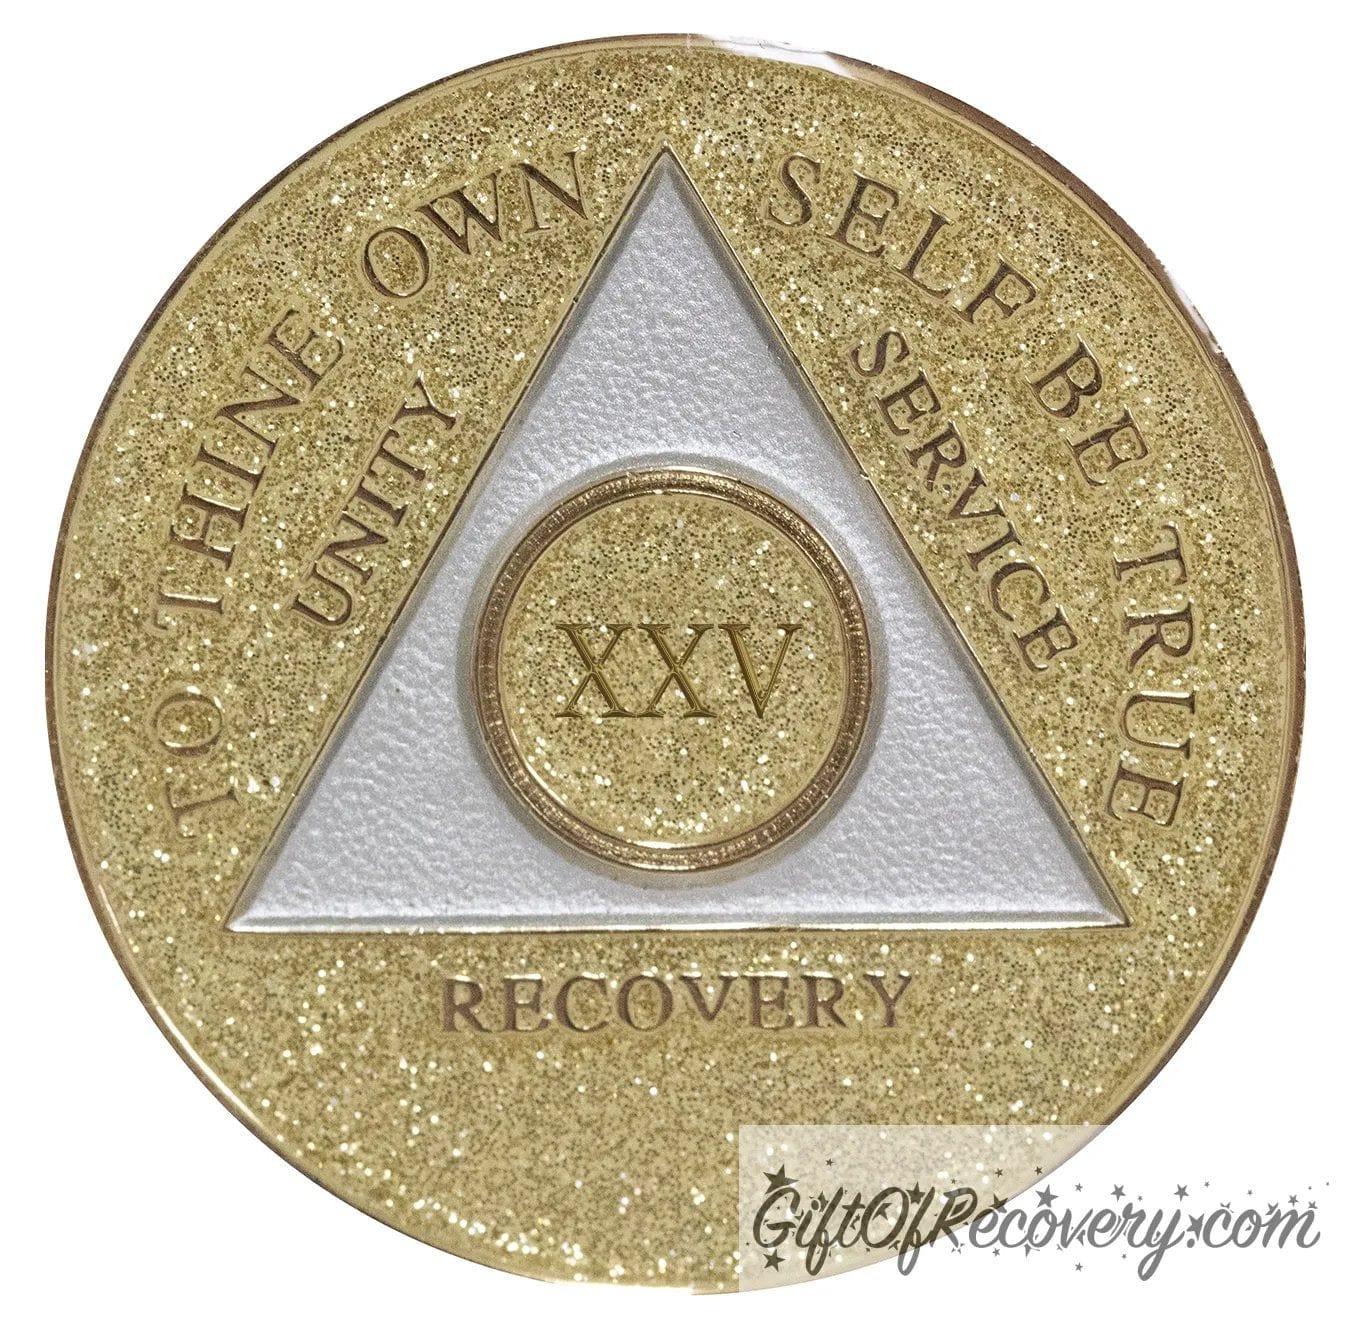 25 year AA medallion Gold glitter, with the triangle pearl white and to thine own self be true, unity, service, recovery, and the roman numeral embossed with 14k gold-plated brass, the recovery medallion is sealed with resin for a shiny finish that will last and is scratch proof.